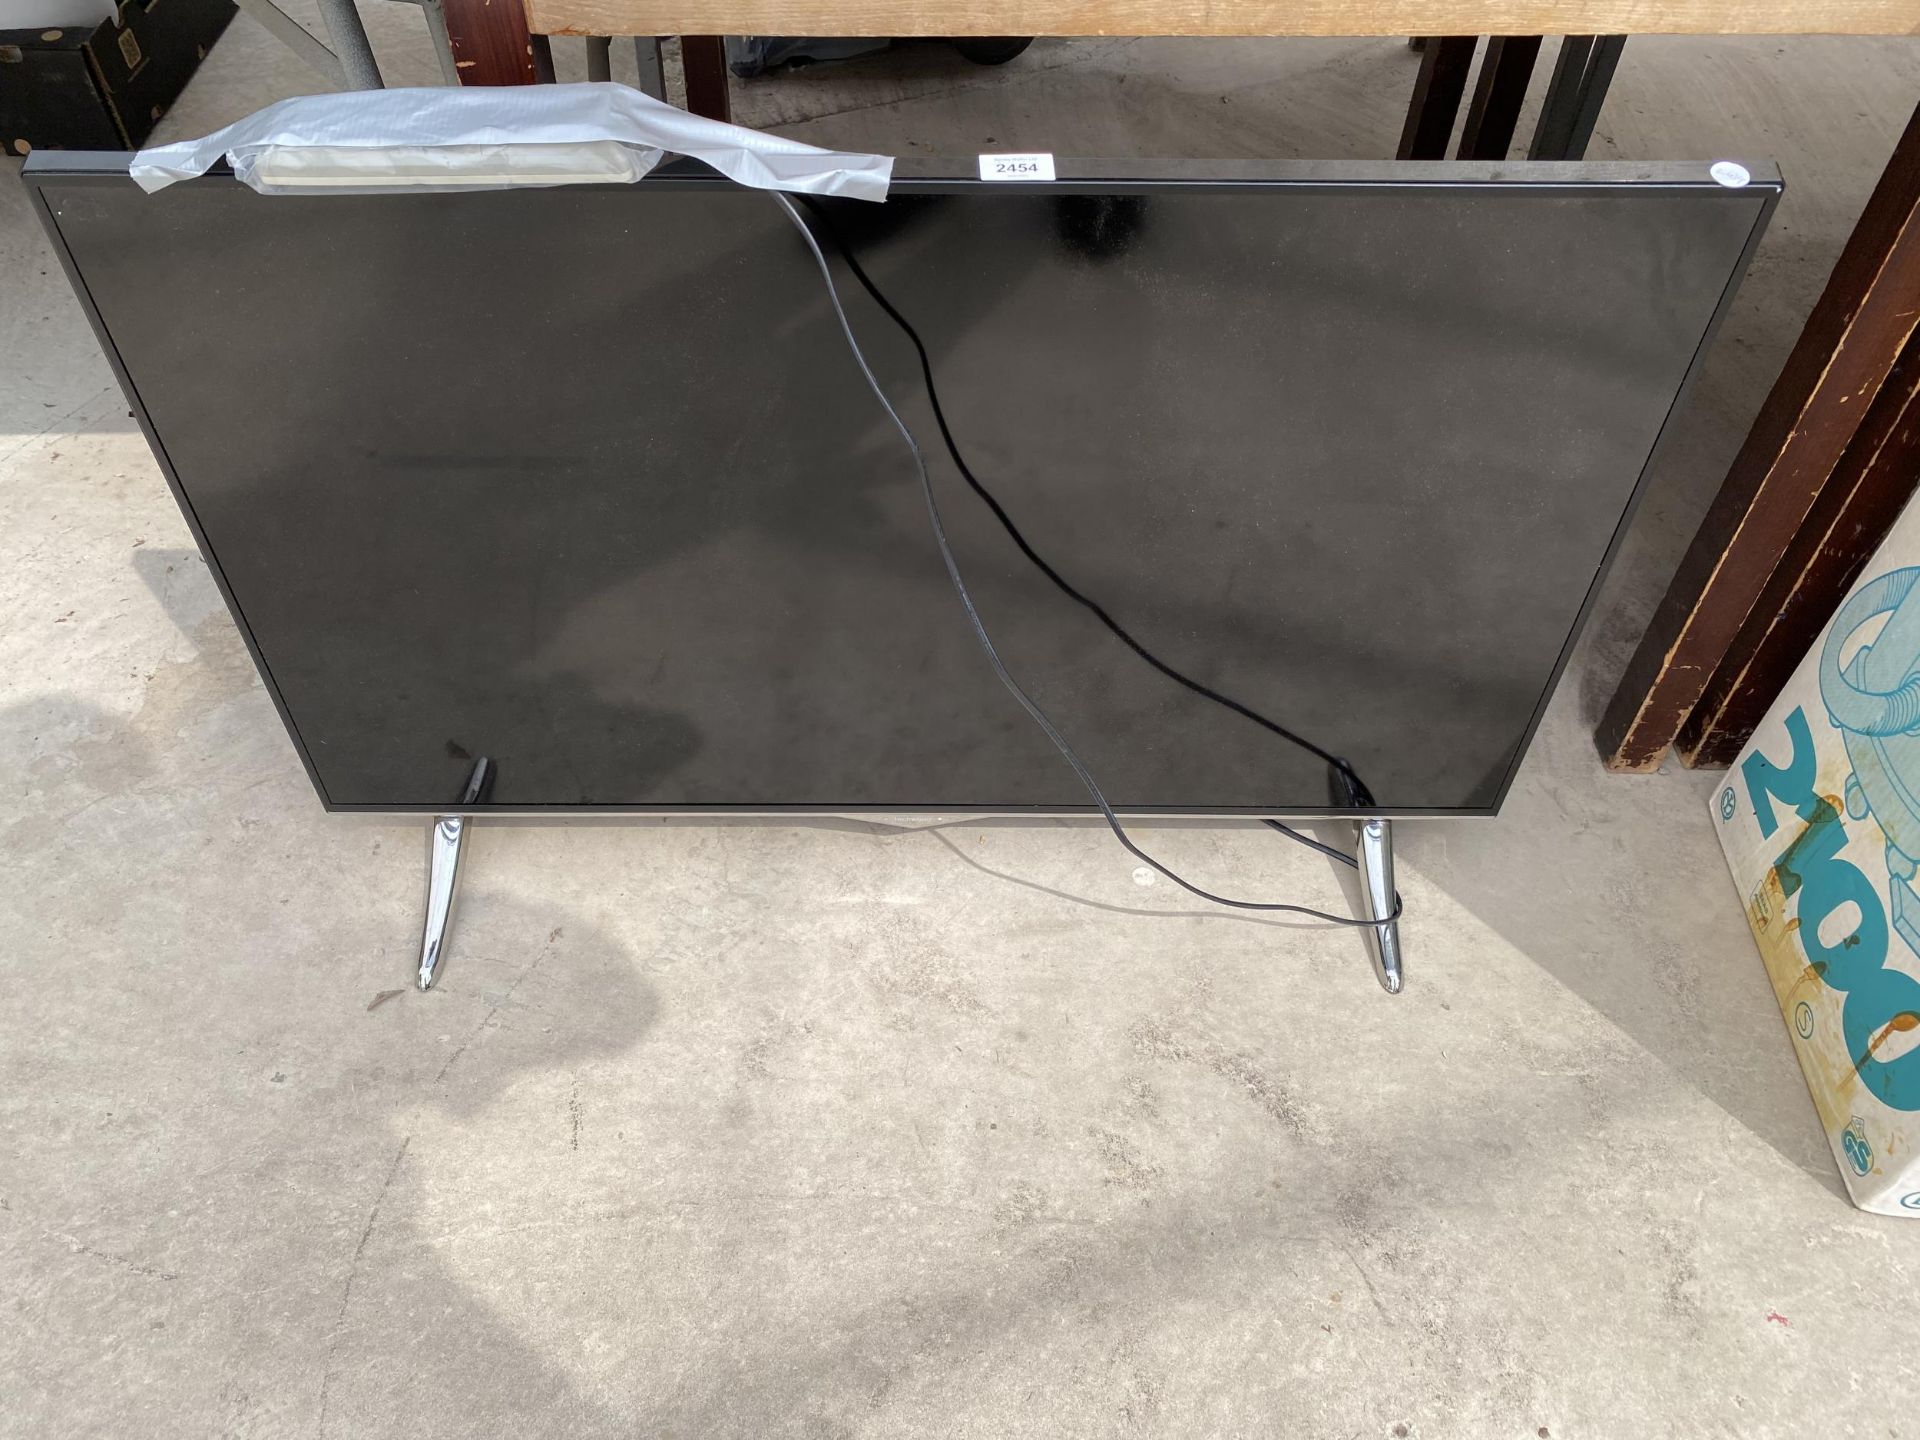 A TECHWOOD 40" TELEVISION WITH REMOTE CONTROL